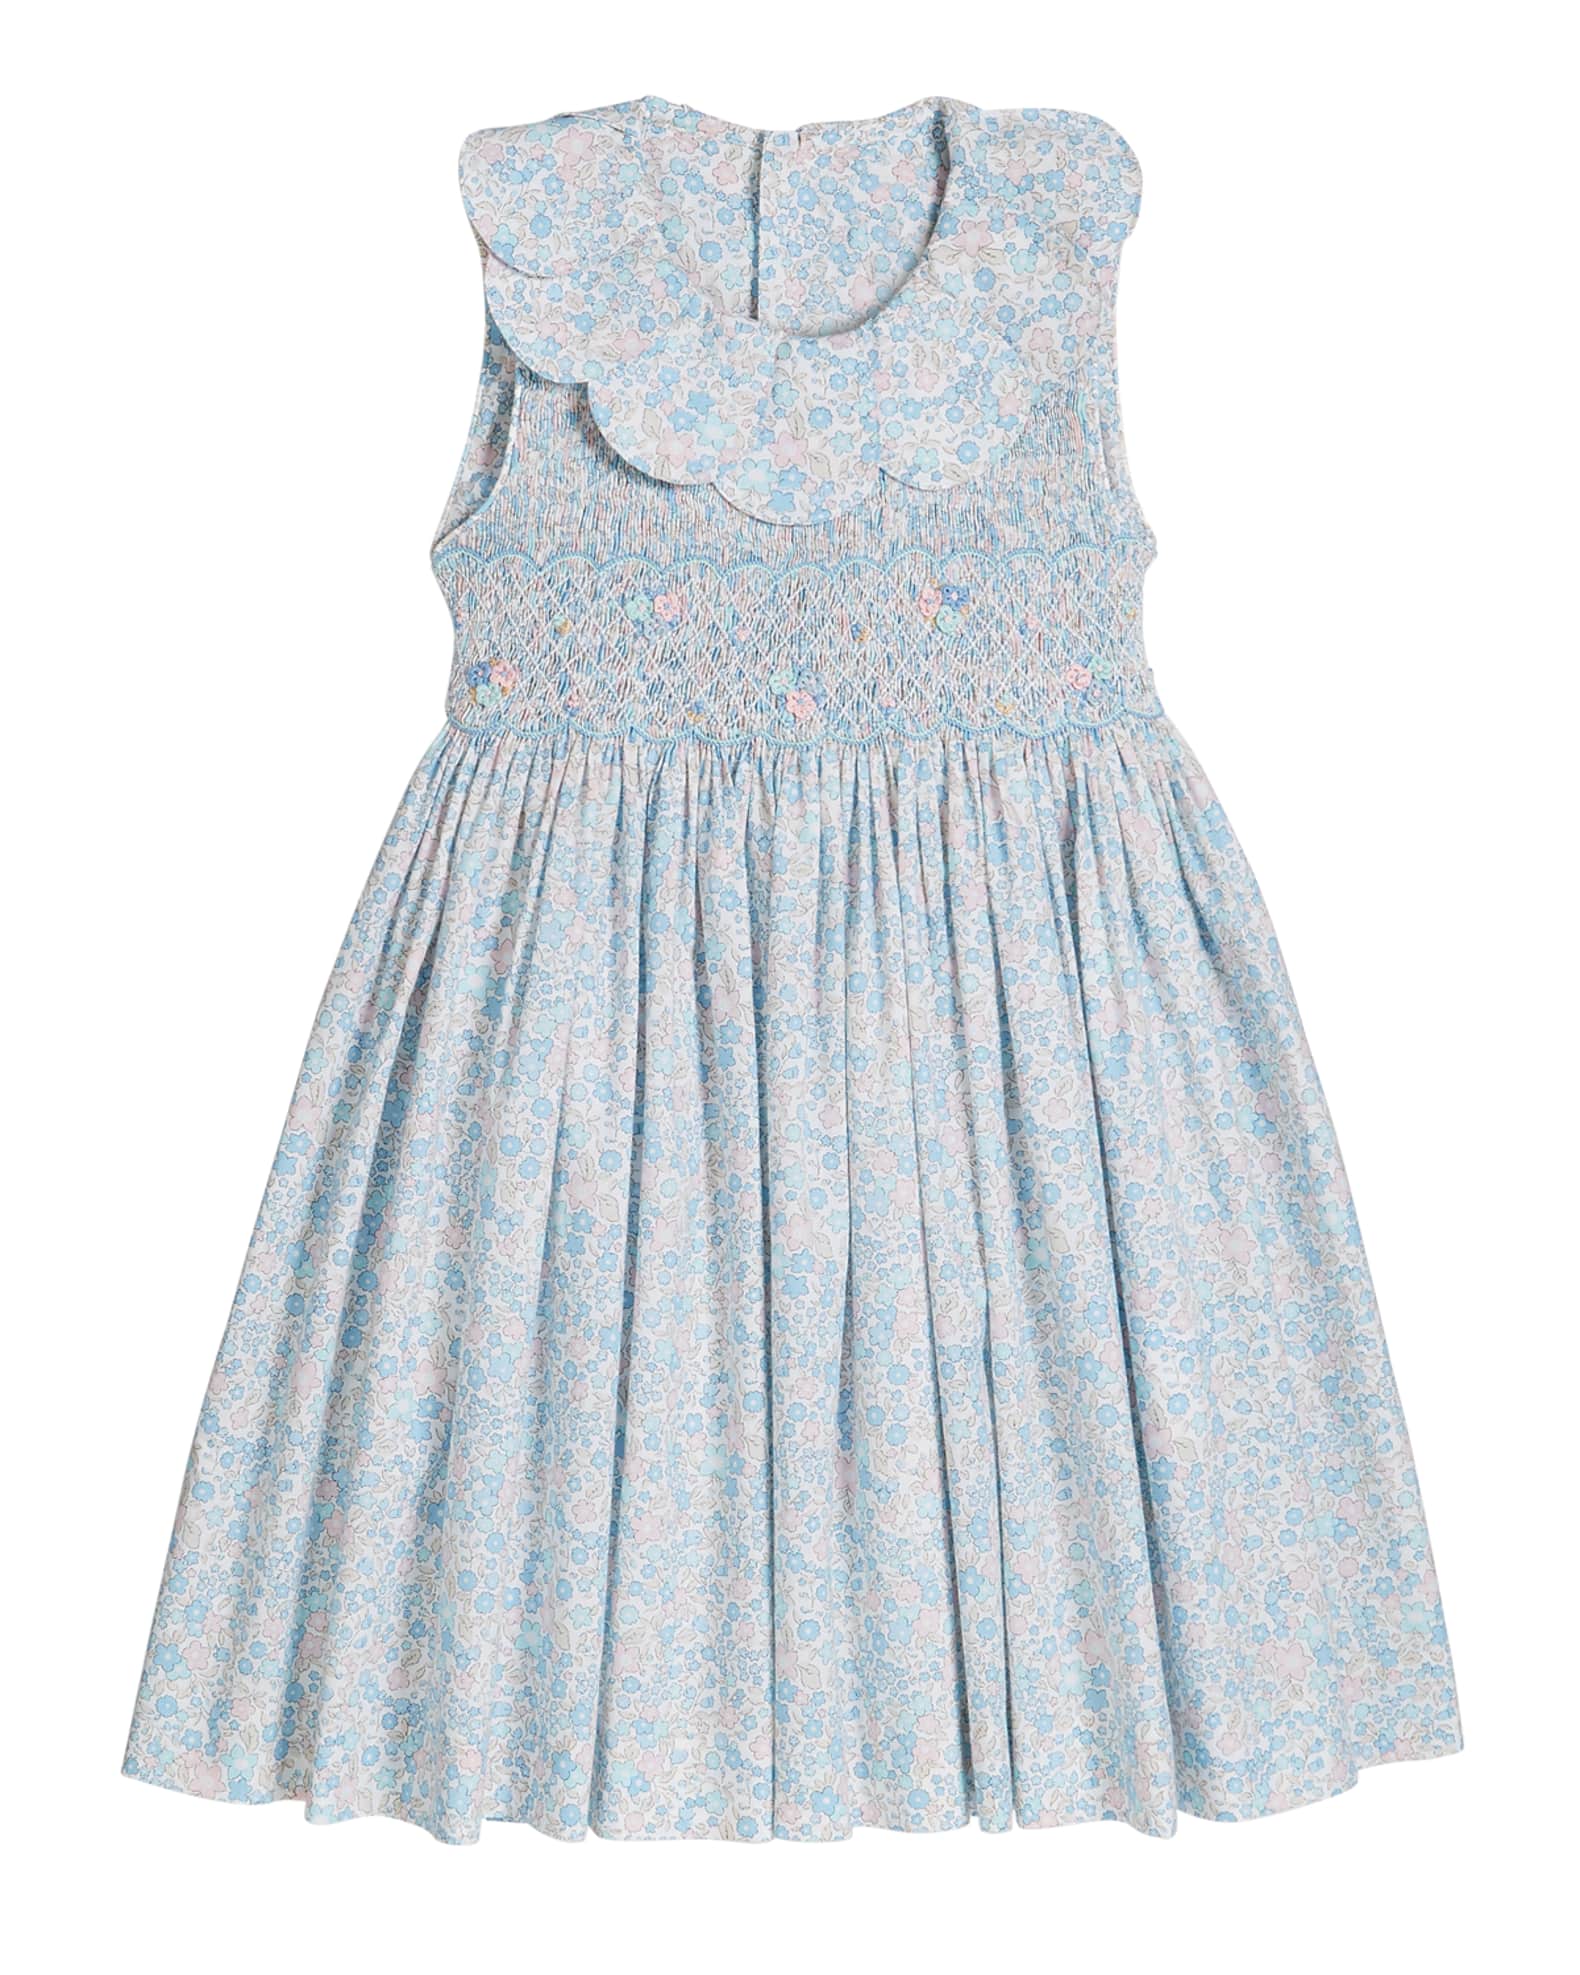 Girl's Floral Print Petal Collar Smocked Dress, Size 4-6X and Matching ...